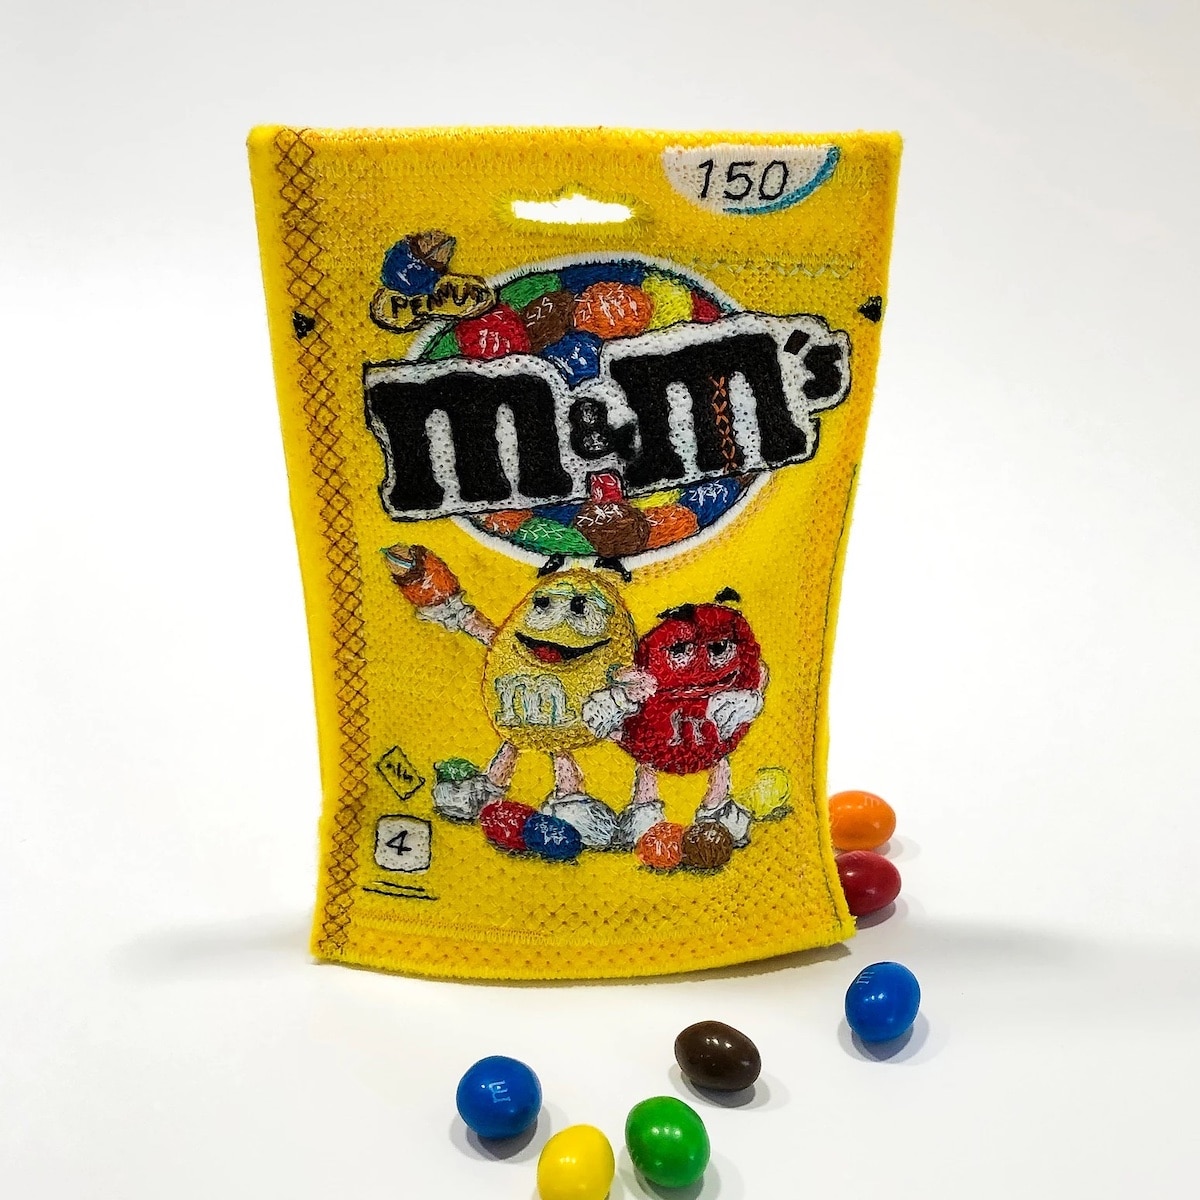 Felt and Embroidery M&M's